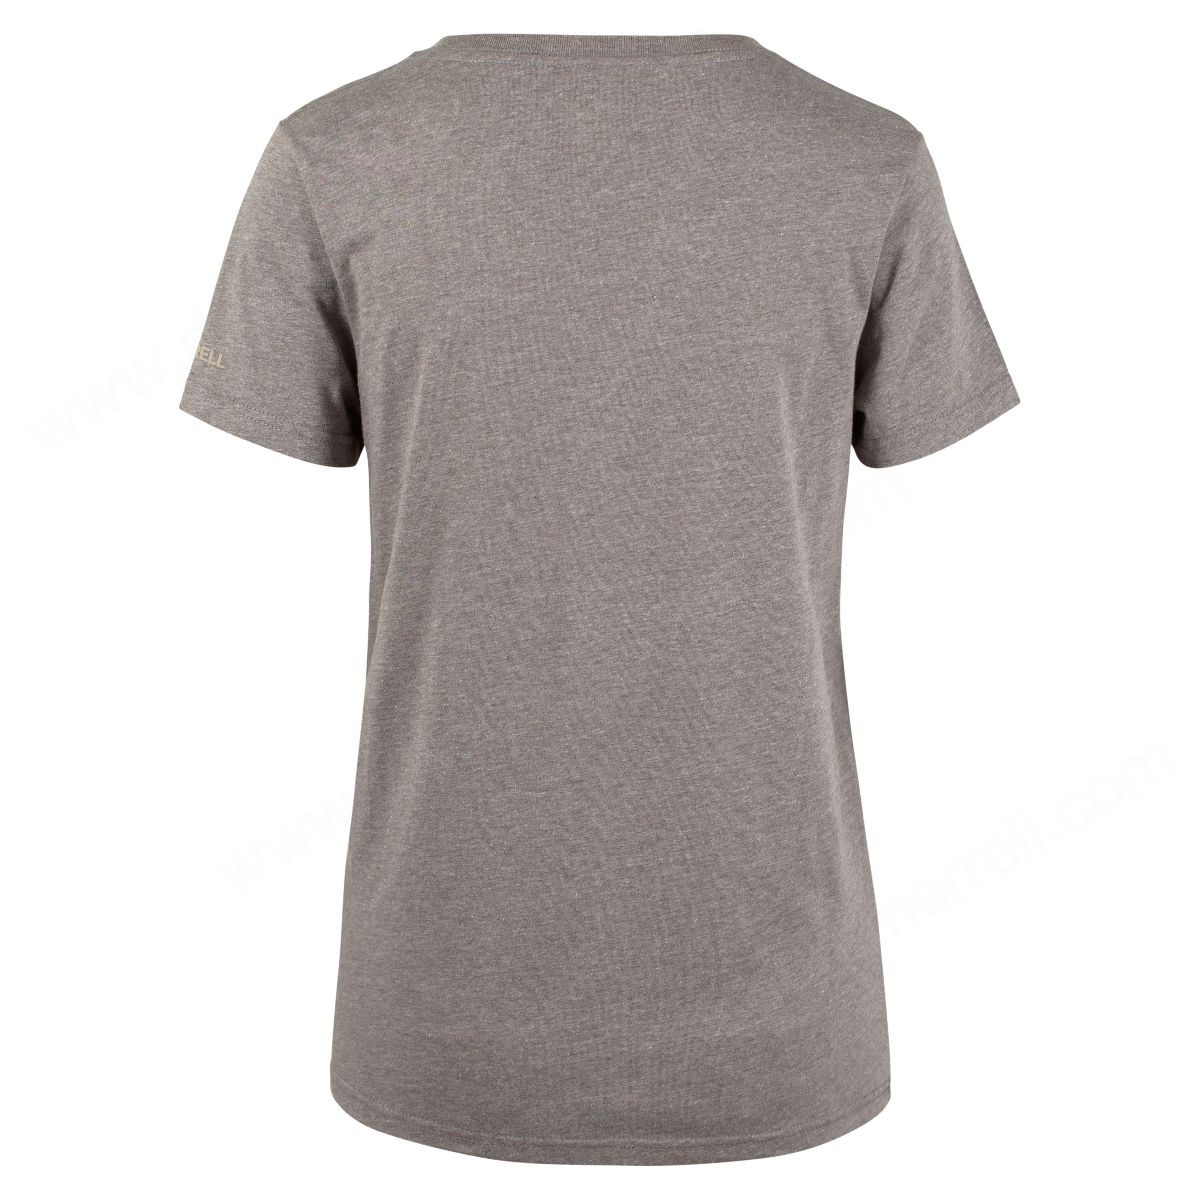 Merrell Lady's Rolling Hills Graphic Tshirts Heather Grey - -1